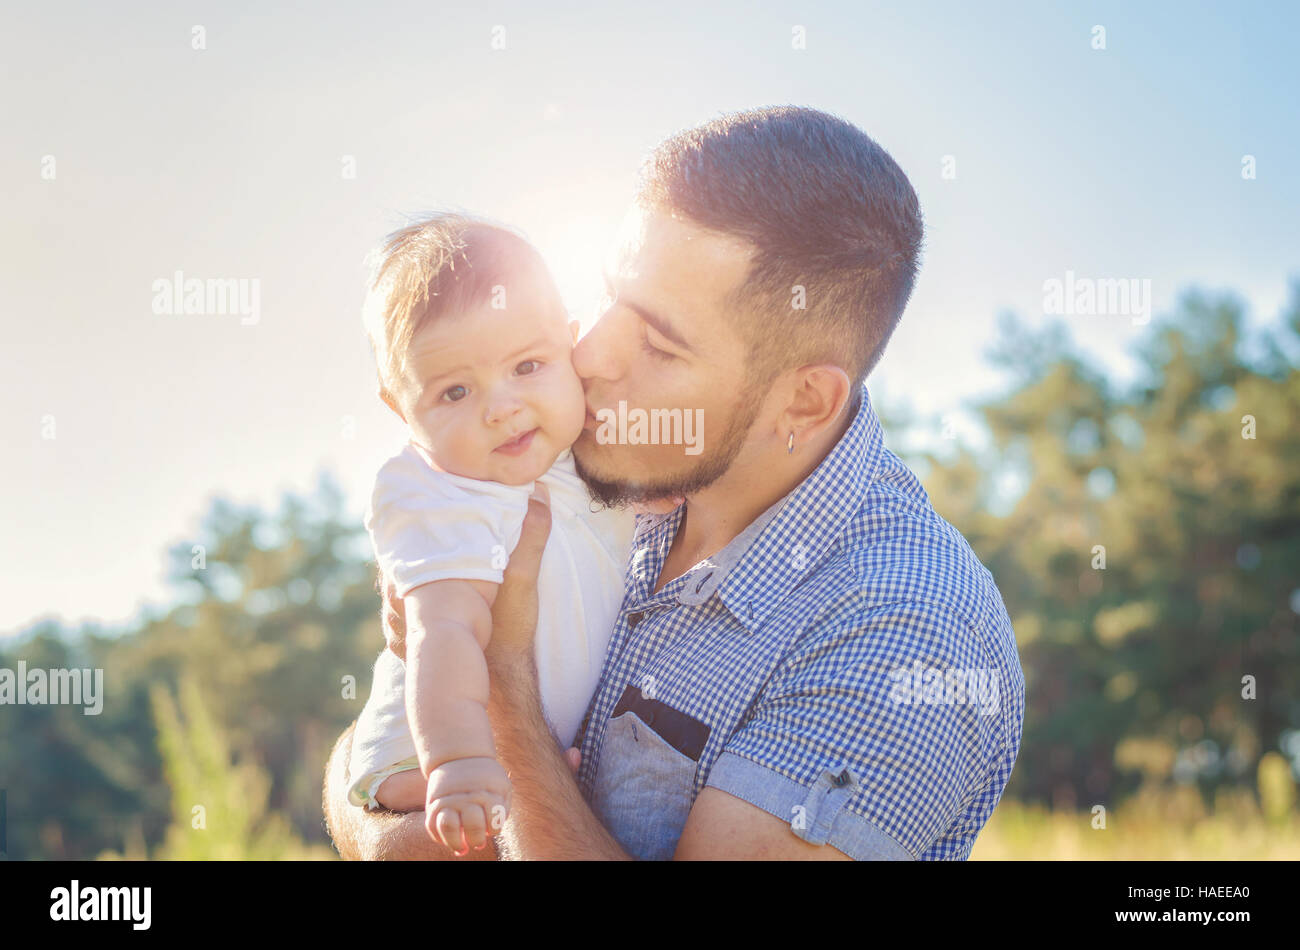 Young daddy kissing a baby. Walk autumn evening outdoors. Solar flare illuminates the baby and dad. Stock Photo